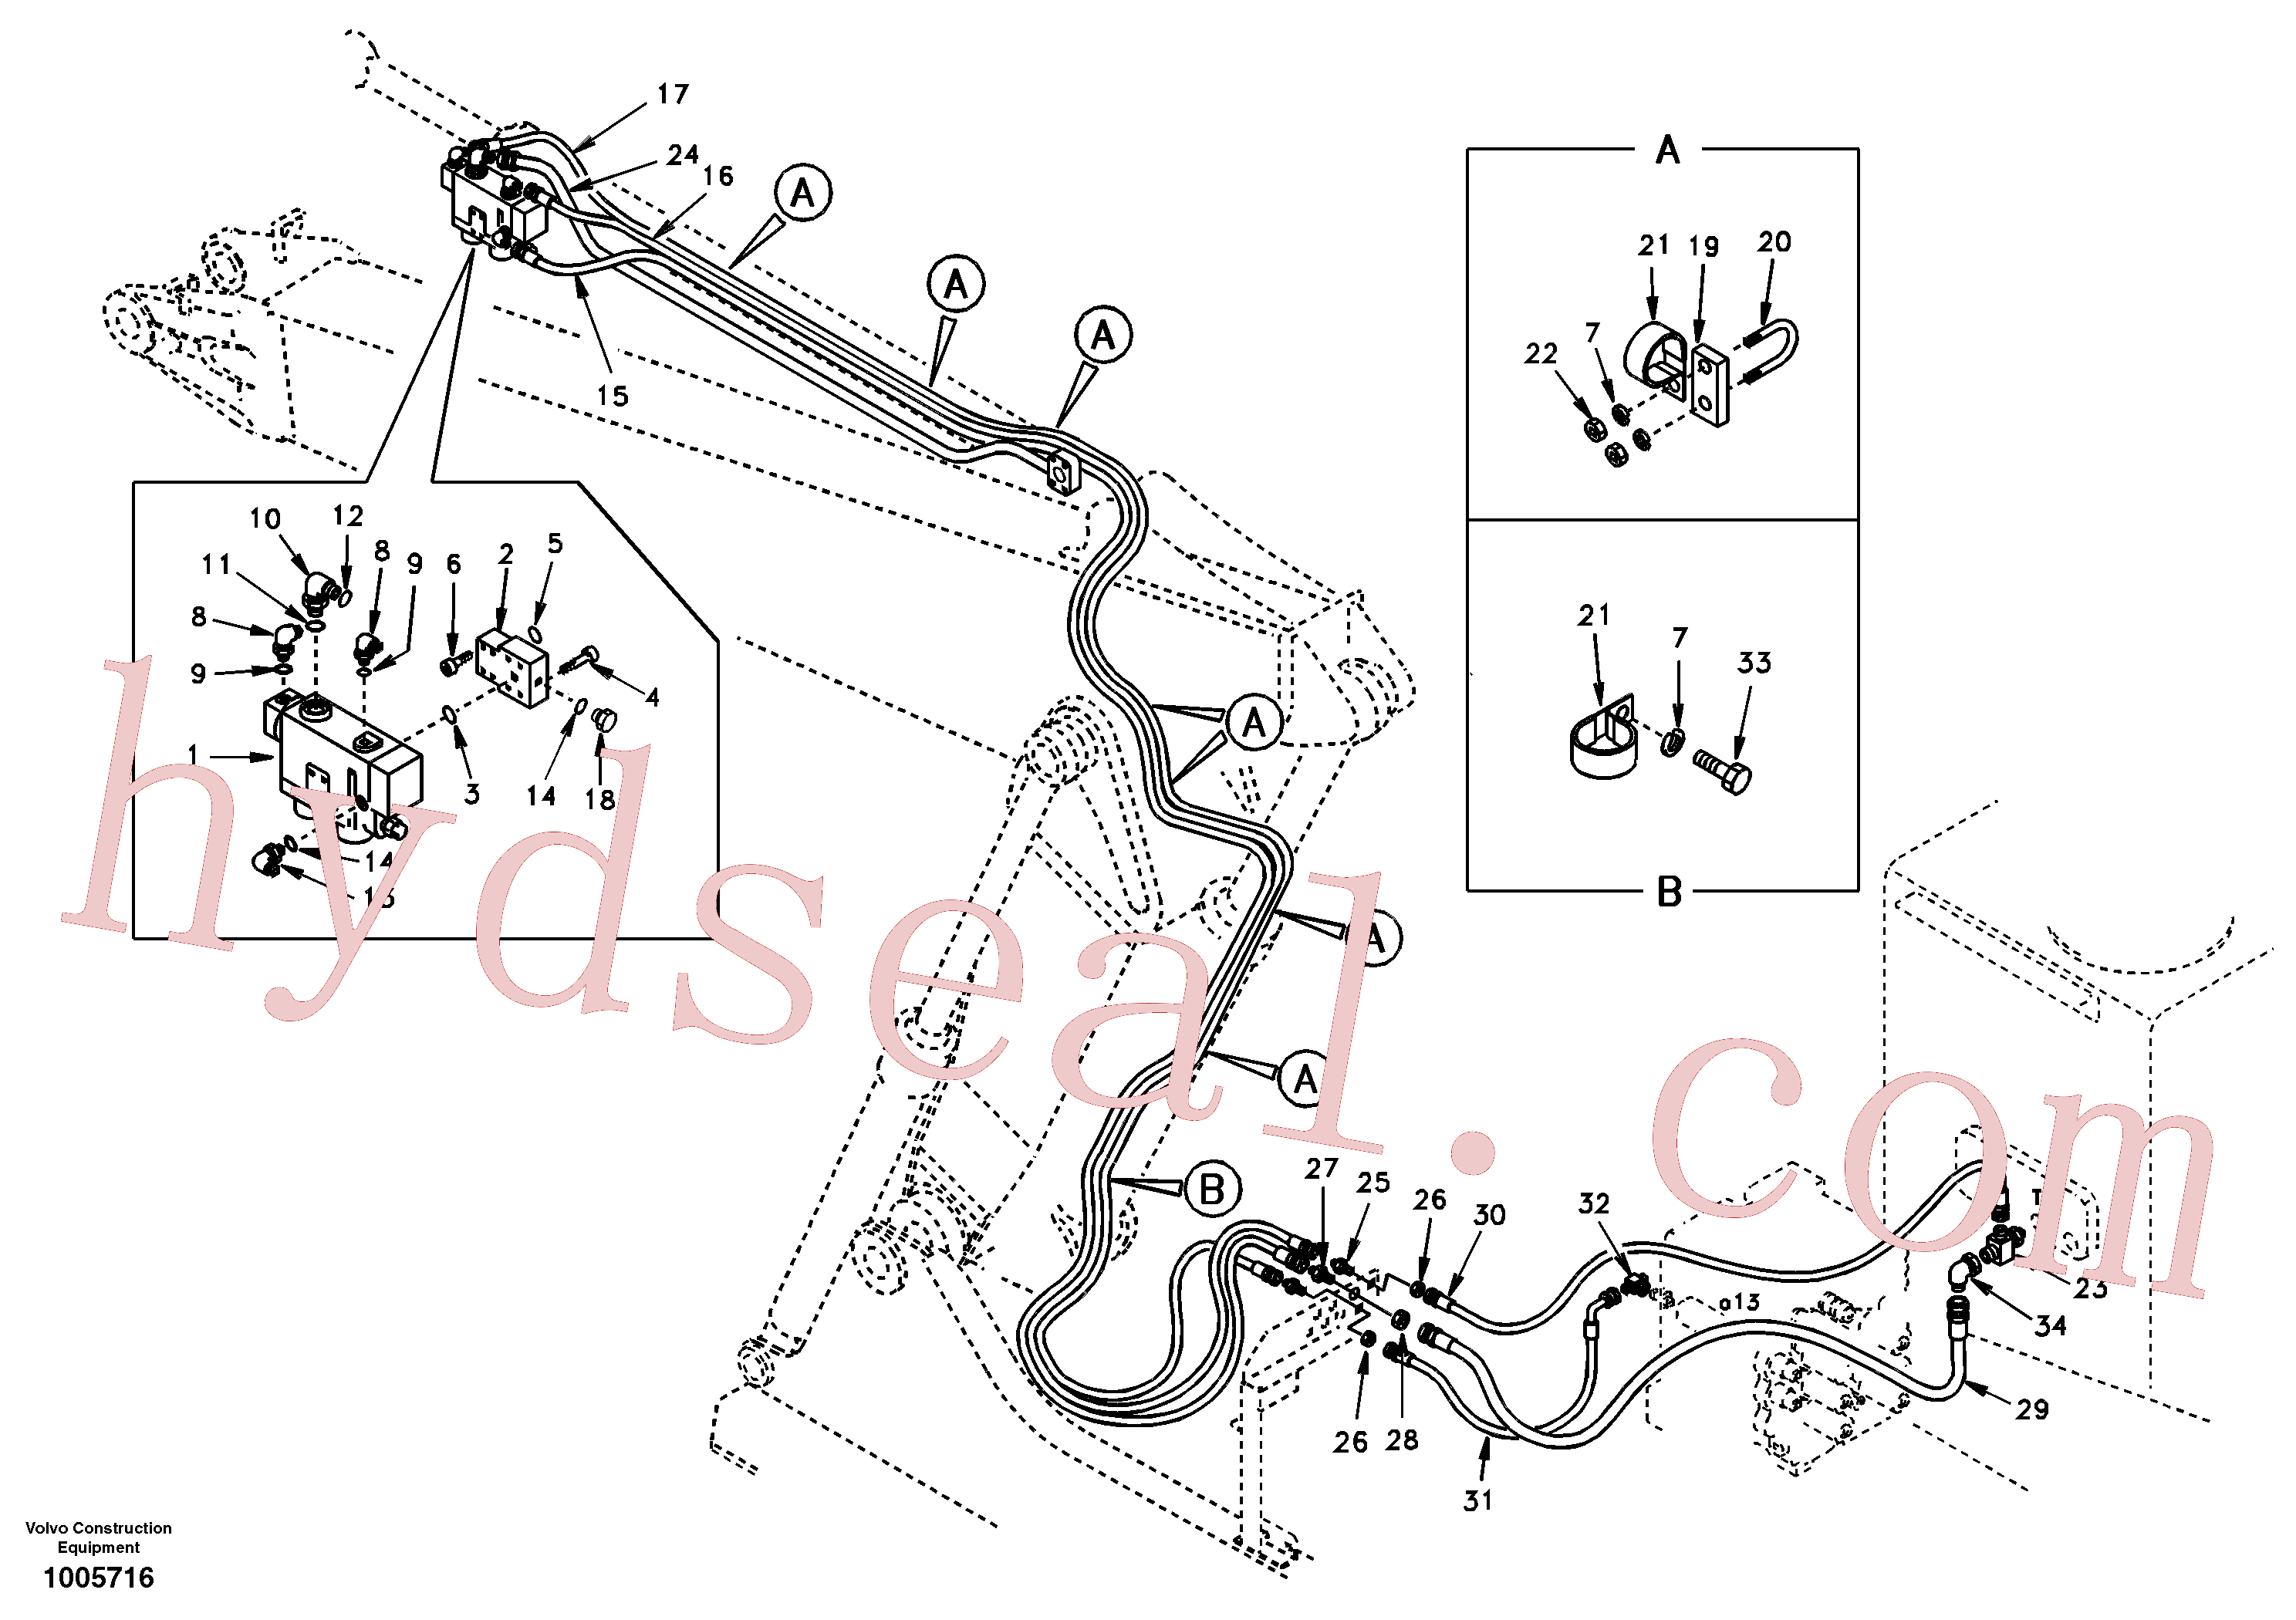 VOE14505579 for Volvo Working hydraulic, dipper arm rupture and adjustable boom(1005716 assembly)